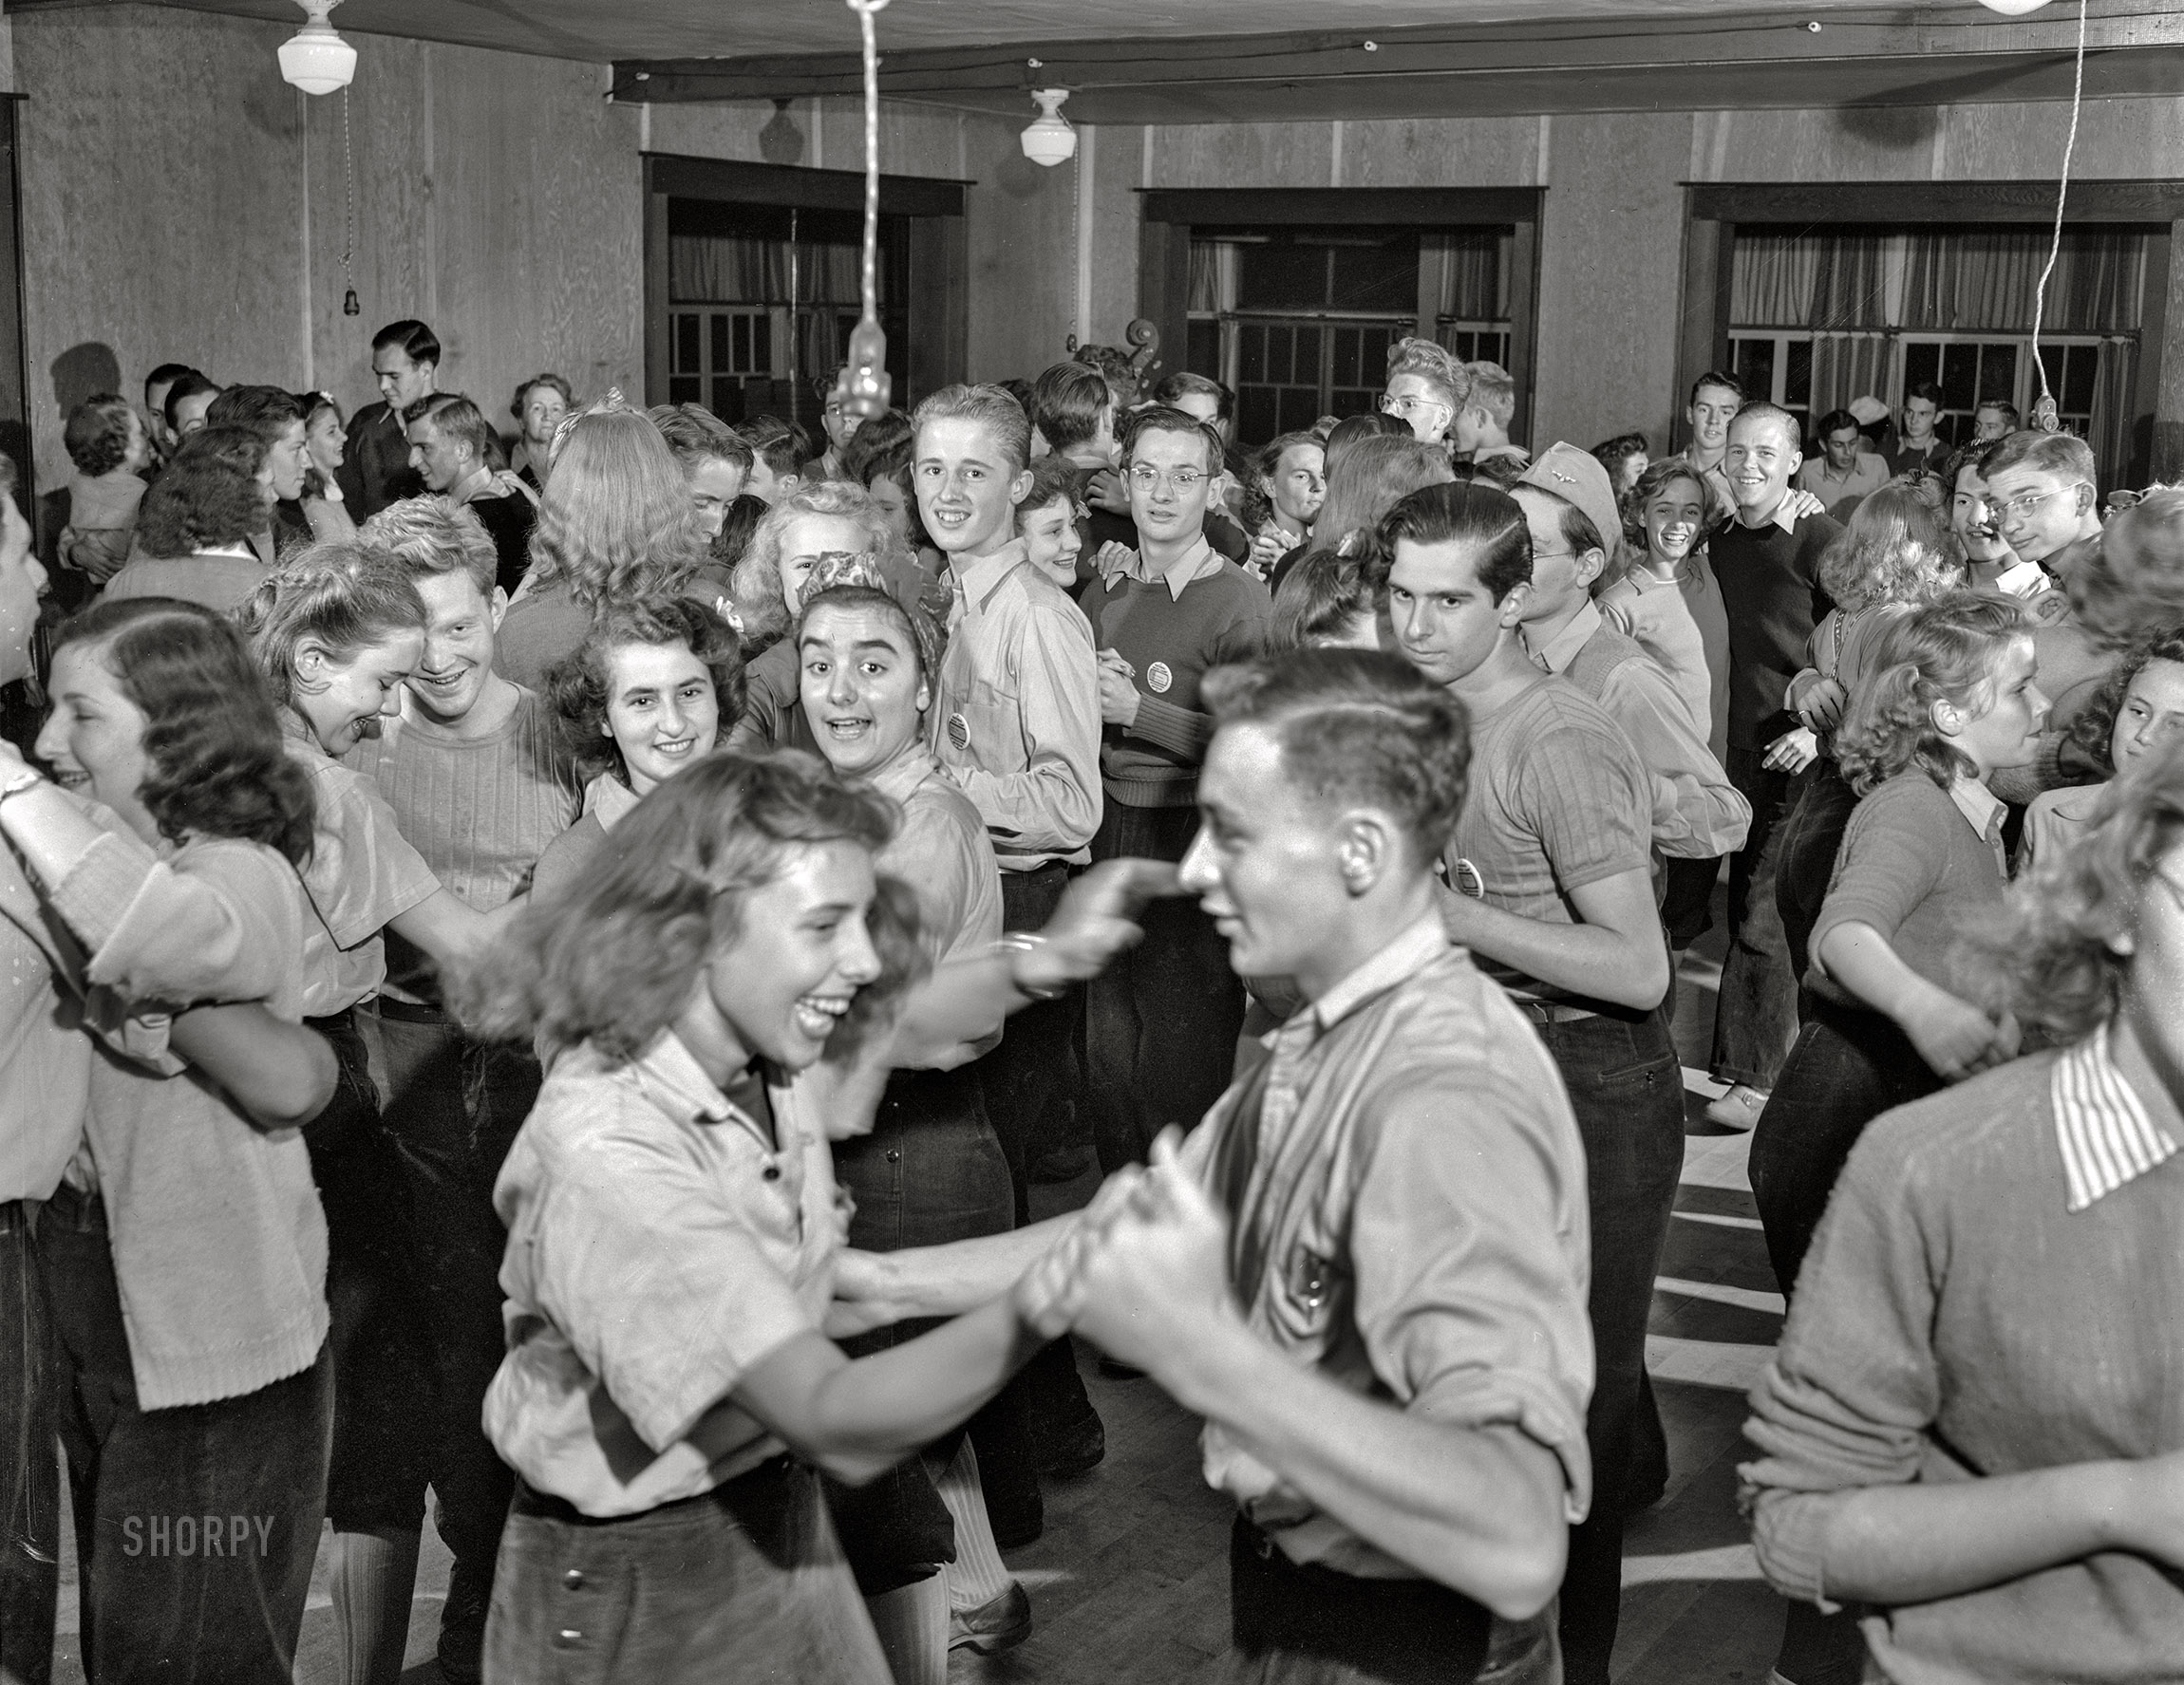 August 1942. "Interlochen, Michigan. National Music Camp, where some 300 young musicians study symphonic music for eight weeks each summer. Dance jamboree on a Monday night." Acetate negative by Arthur S. Siegel for the U.S. Foreign Information Service. View full size.